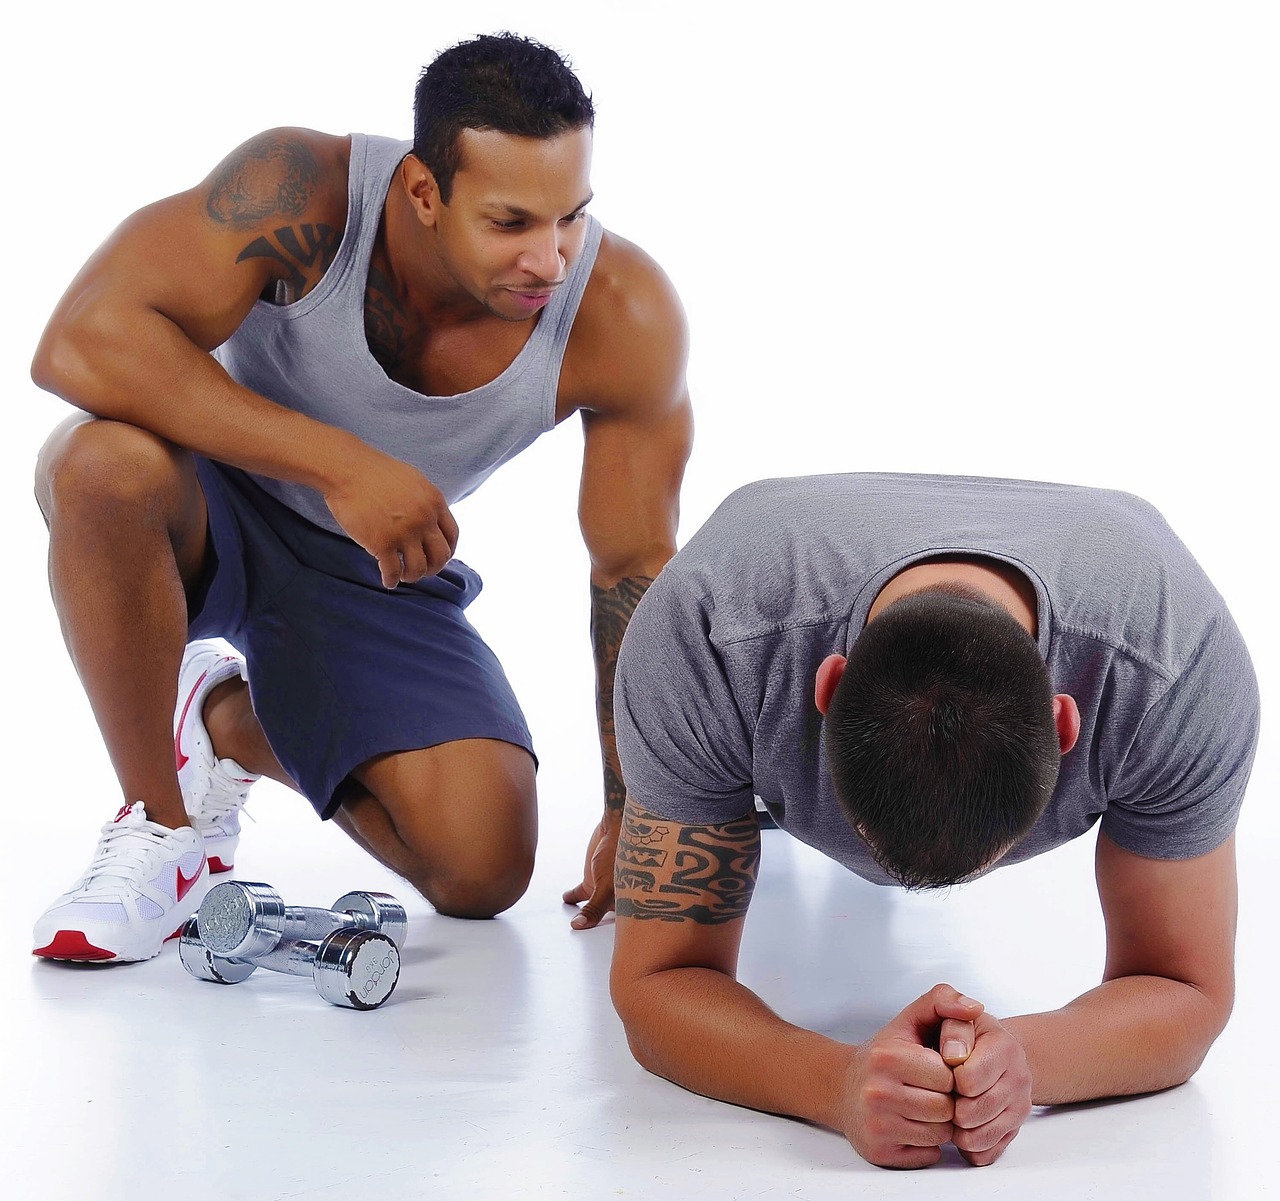 How To Choose A Personal Trainer